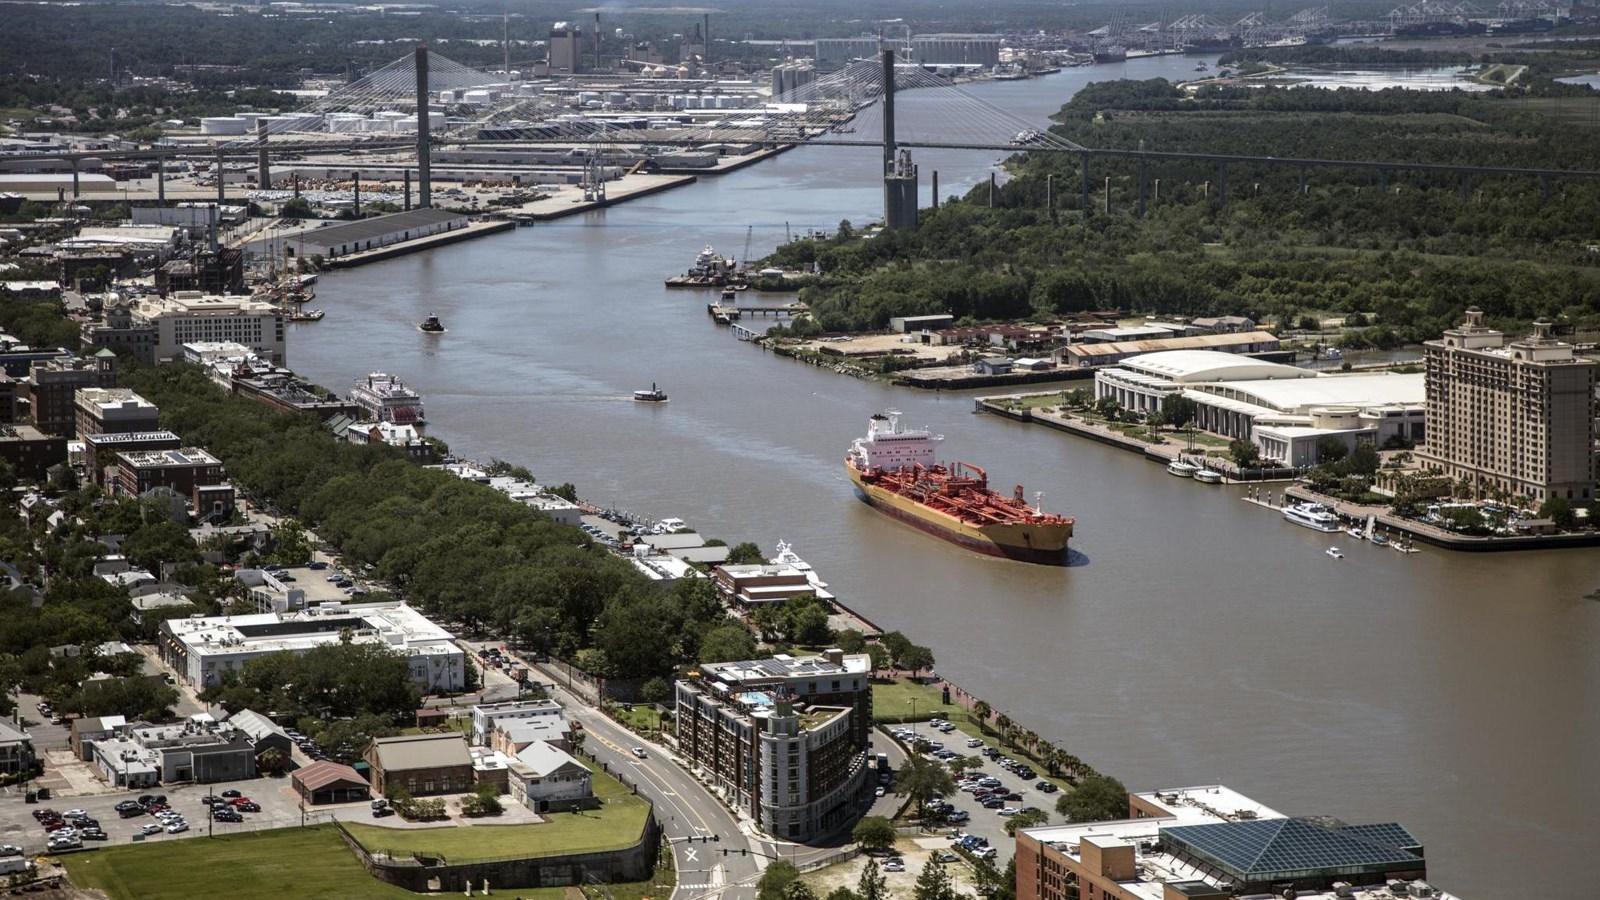 An aerial view of The Savannah River, builings on each side, while a barge moves up river.